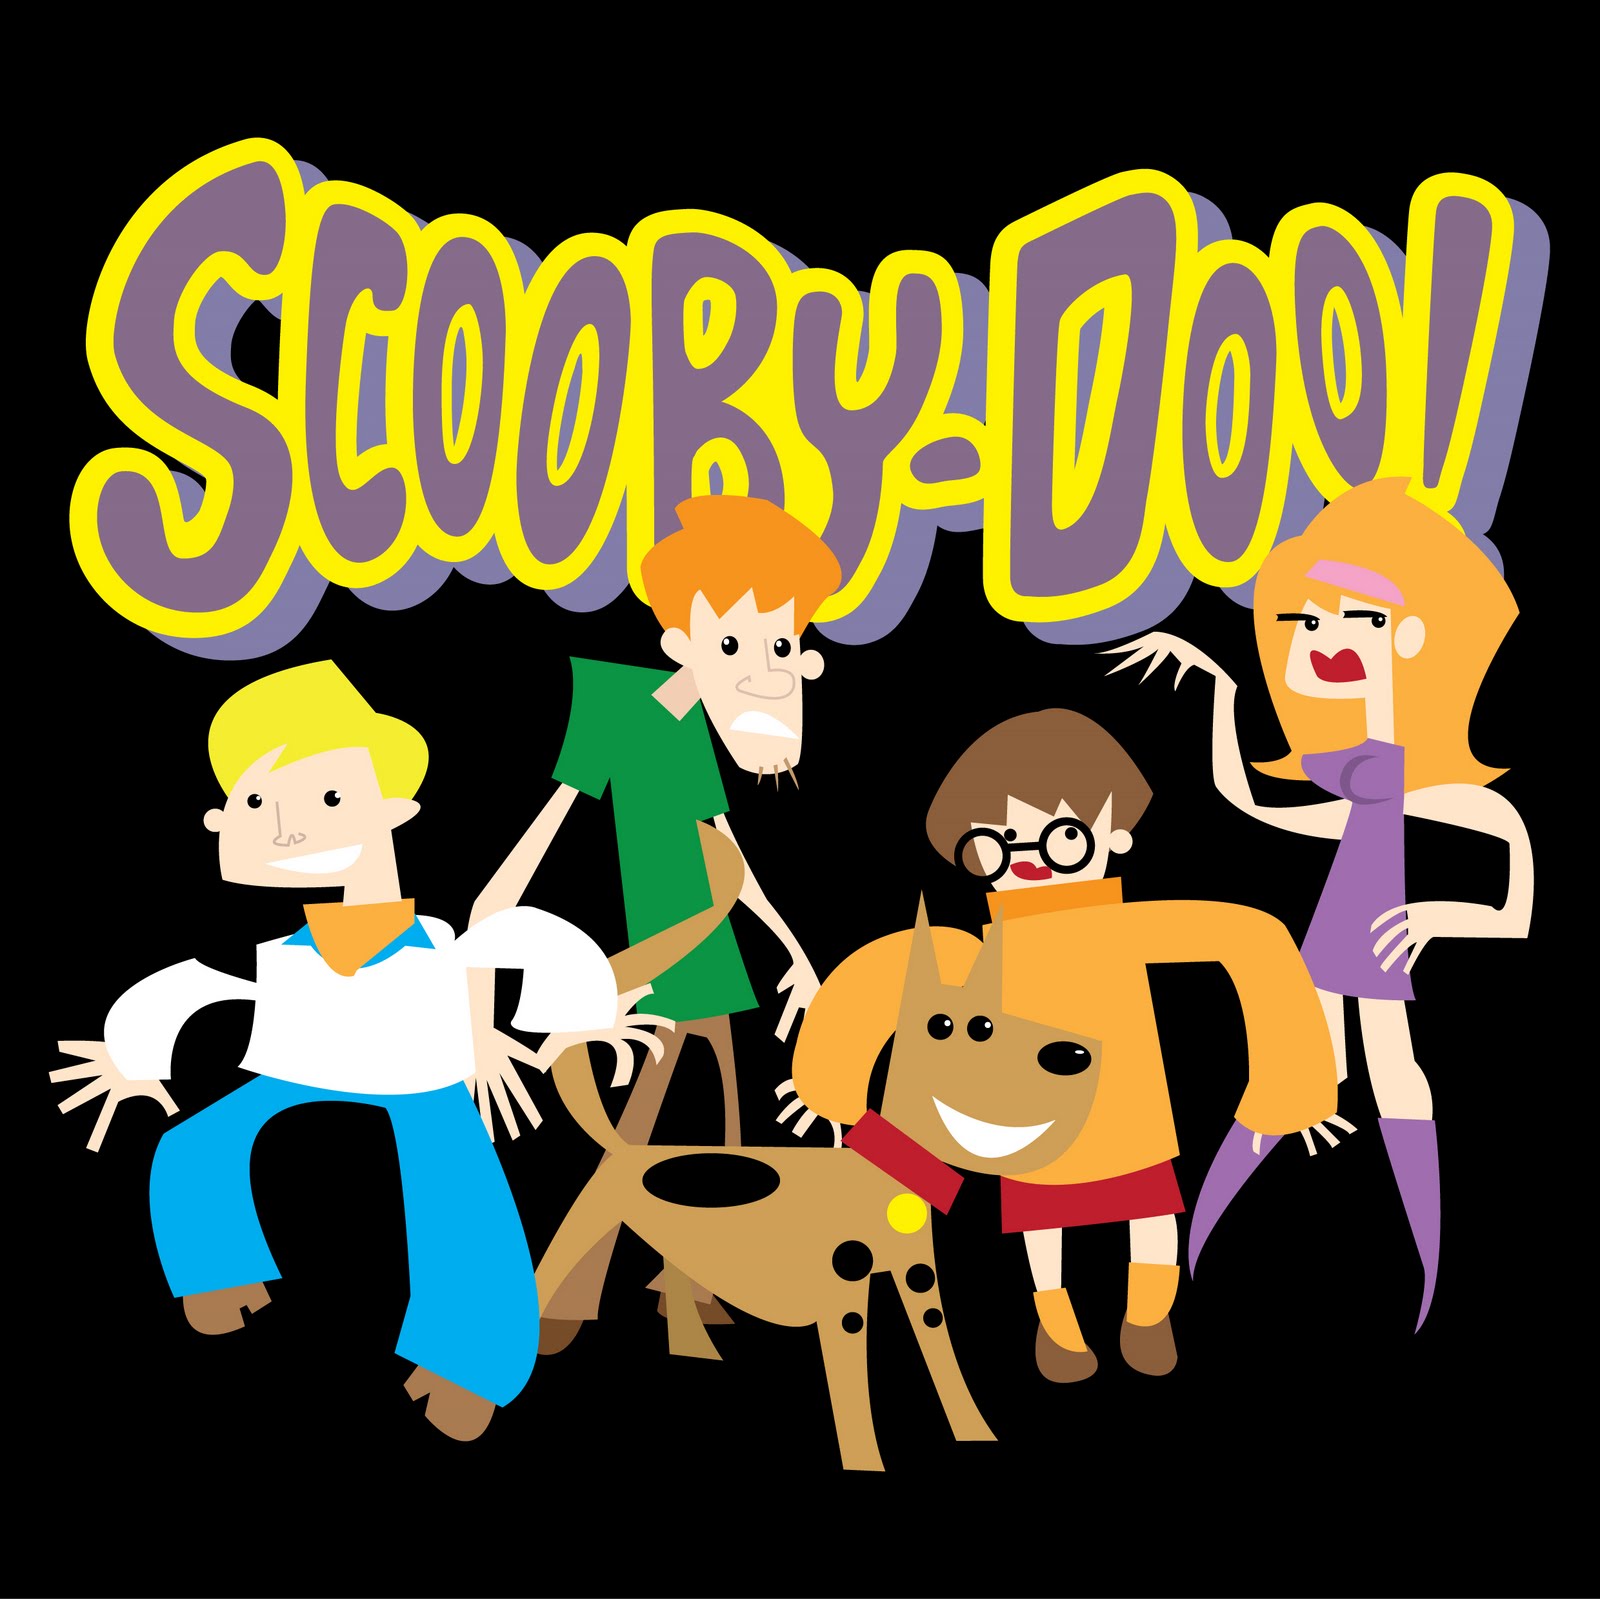 How To Draw Scooby Doo And The Gang - Apr 02, 2020 · 1. - Download Free ...